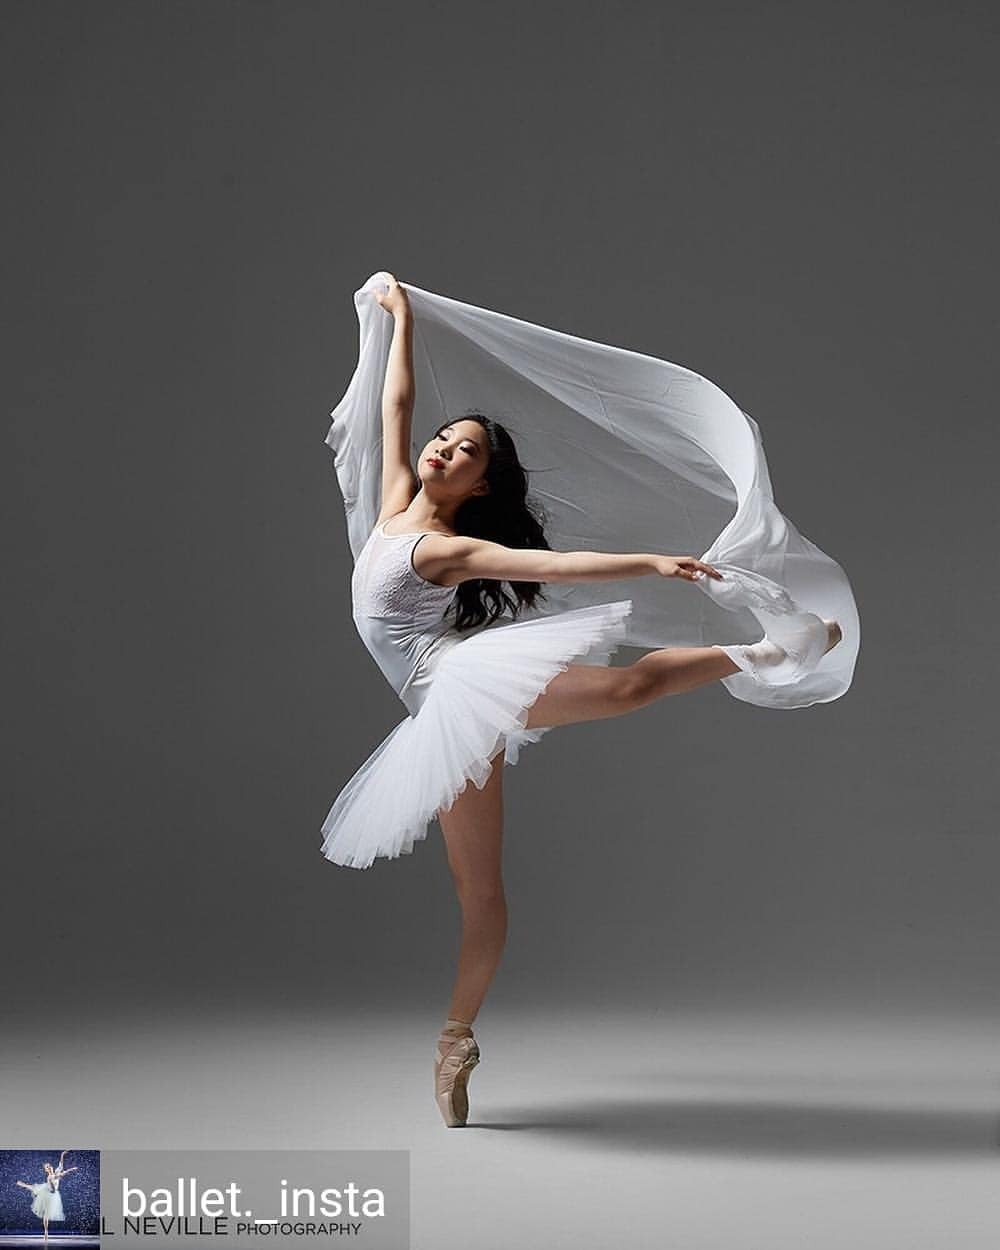 NSFW: Graceful Ballet Dancers Photographed In The Nude On 